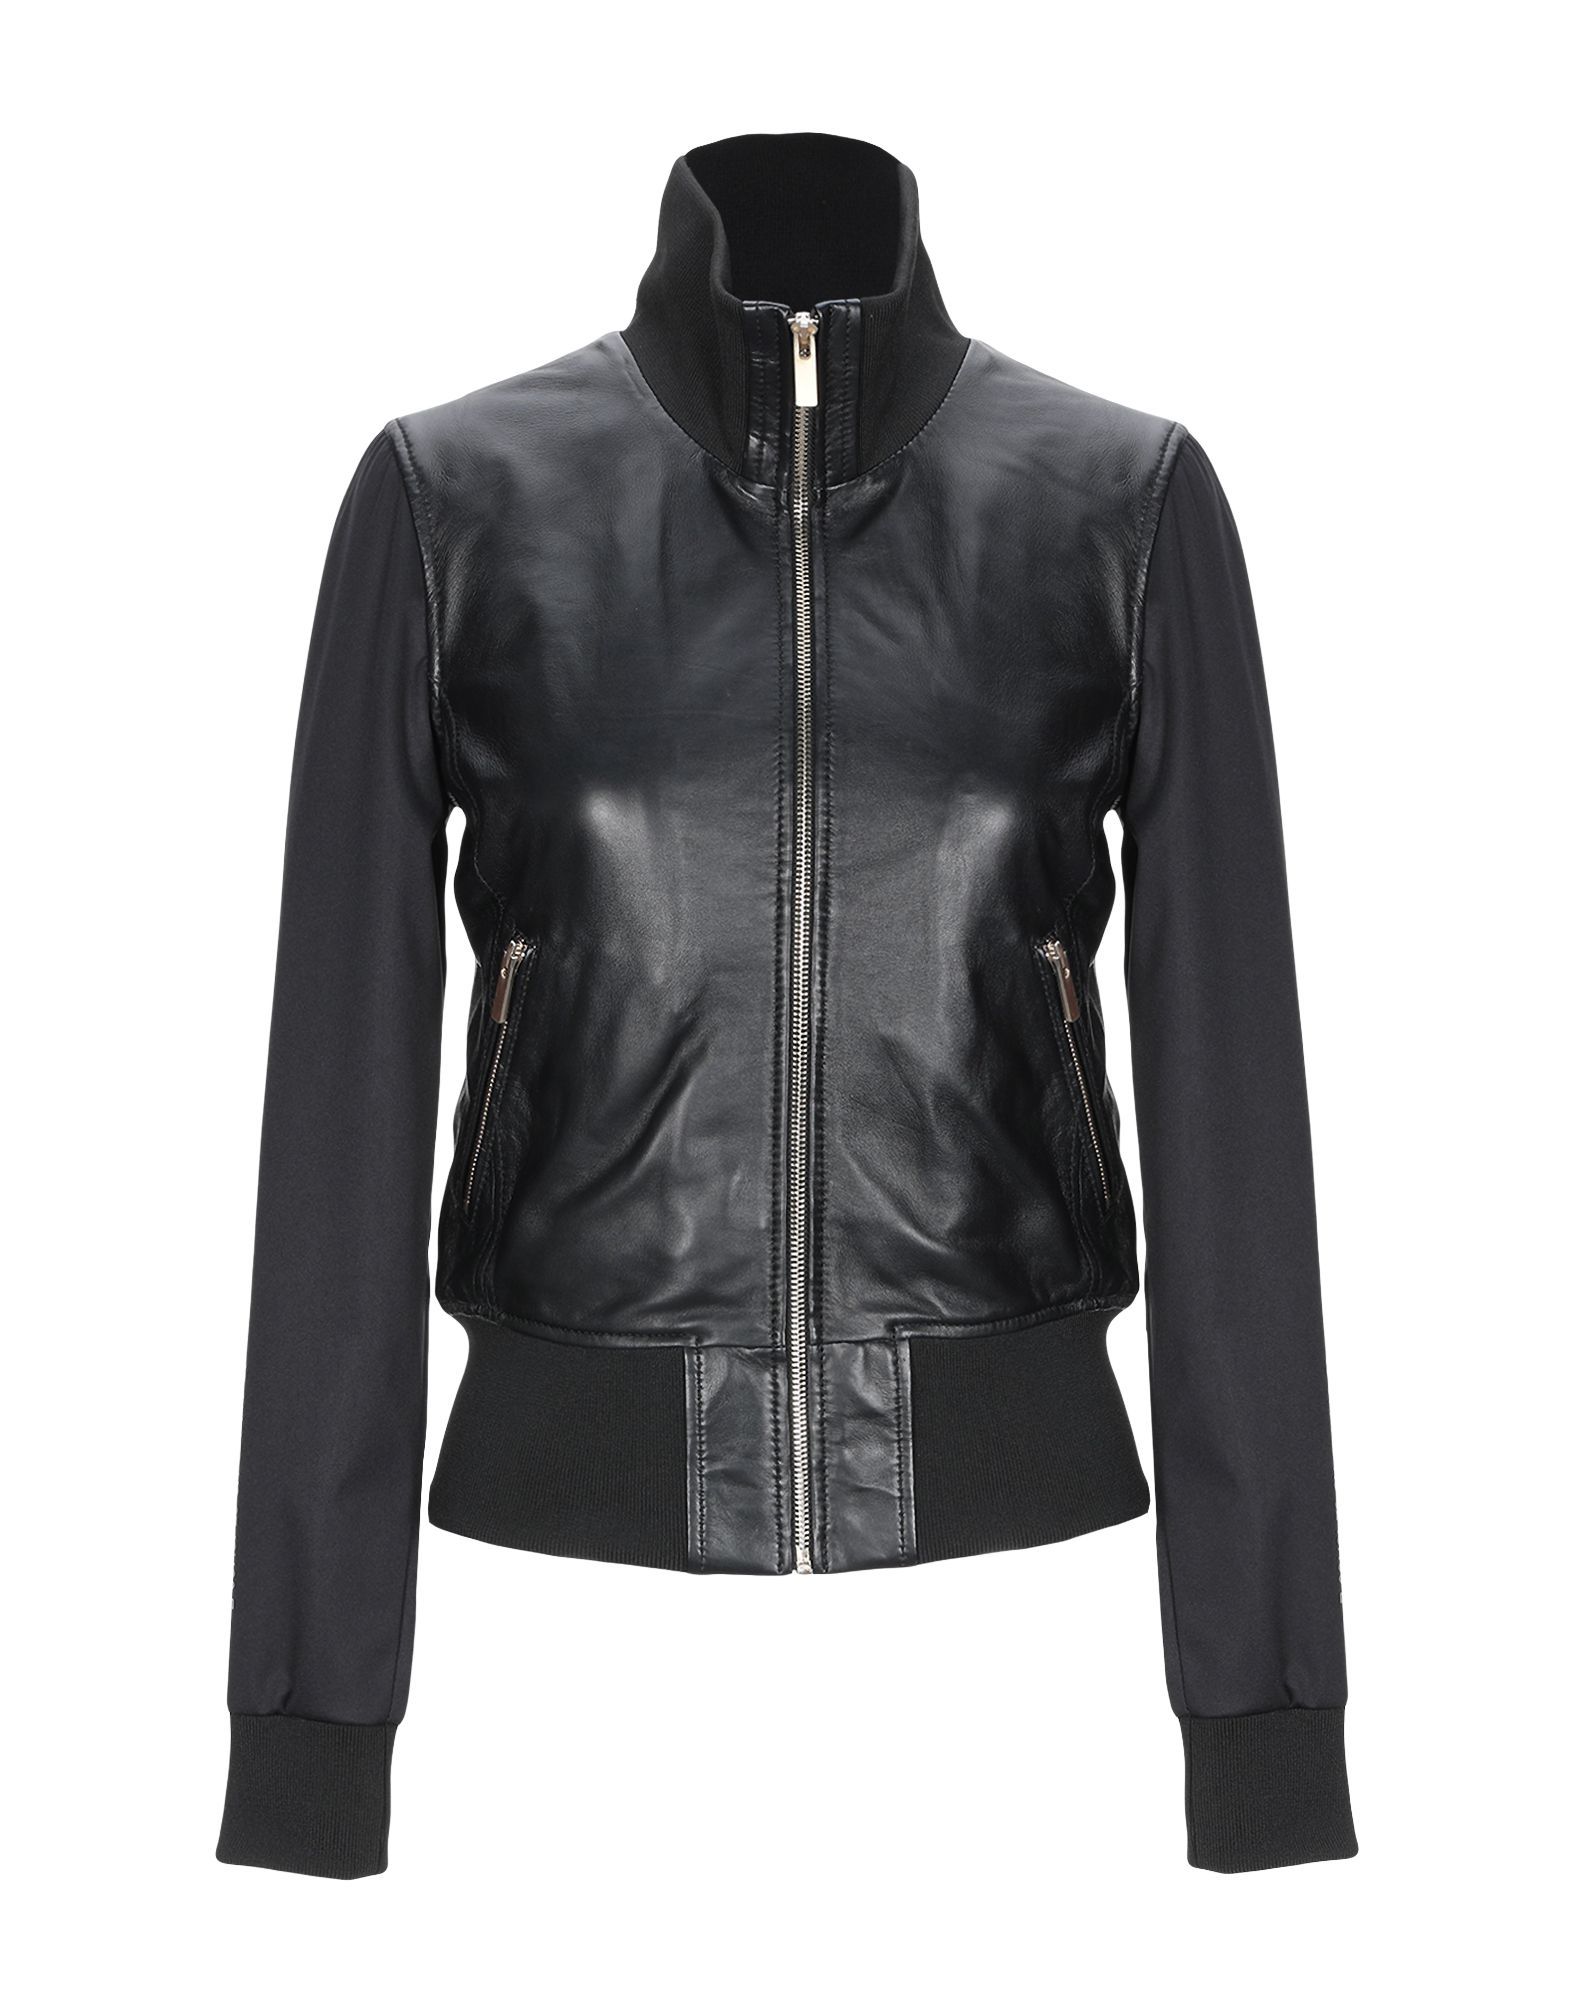 leather, techno fabric, print, solid colour, single-breasted , zip, turtleneck, multipockets, long sleeves, fully lined, contains non-textile parts of animal origin